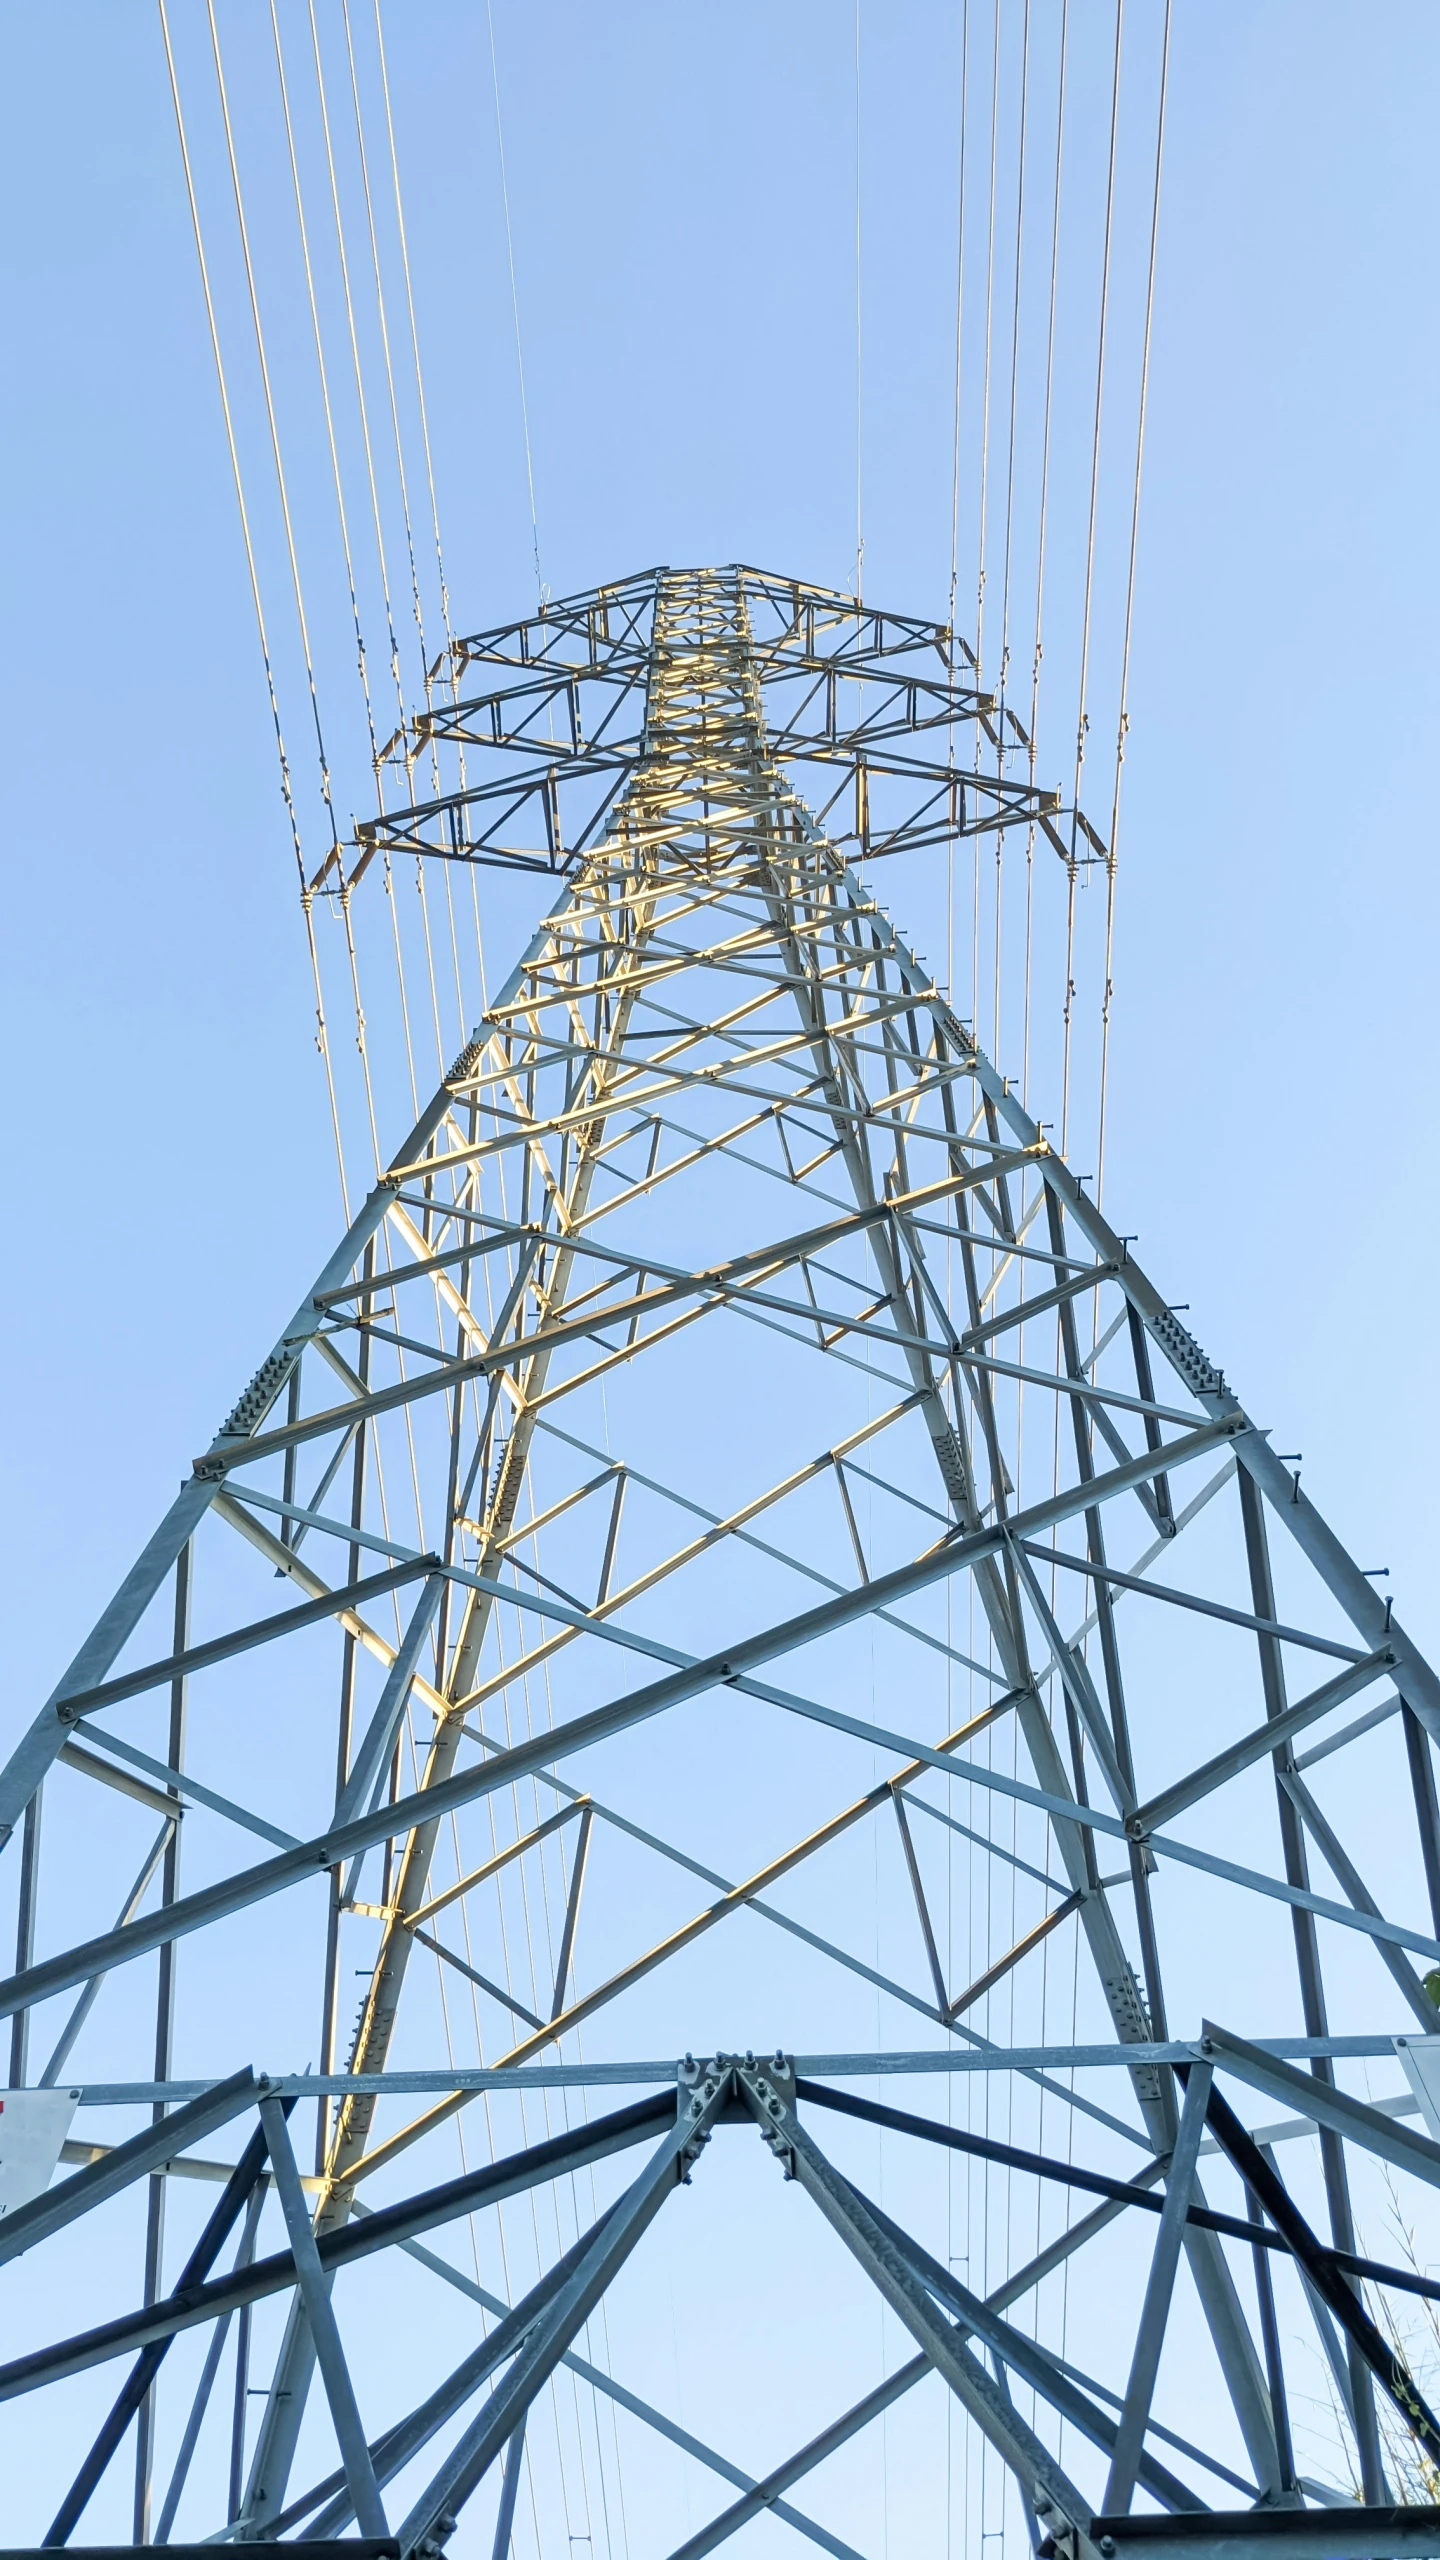 a high voltage power plant tower with electricity lines